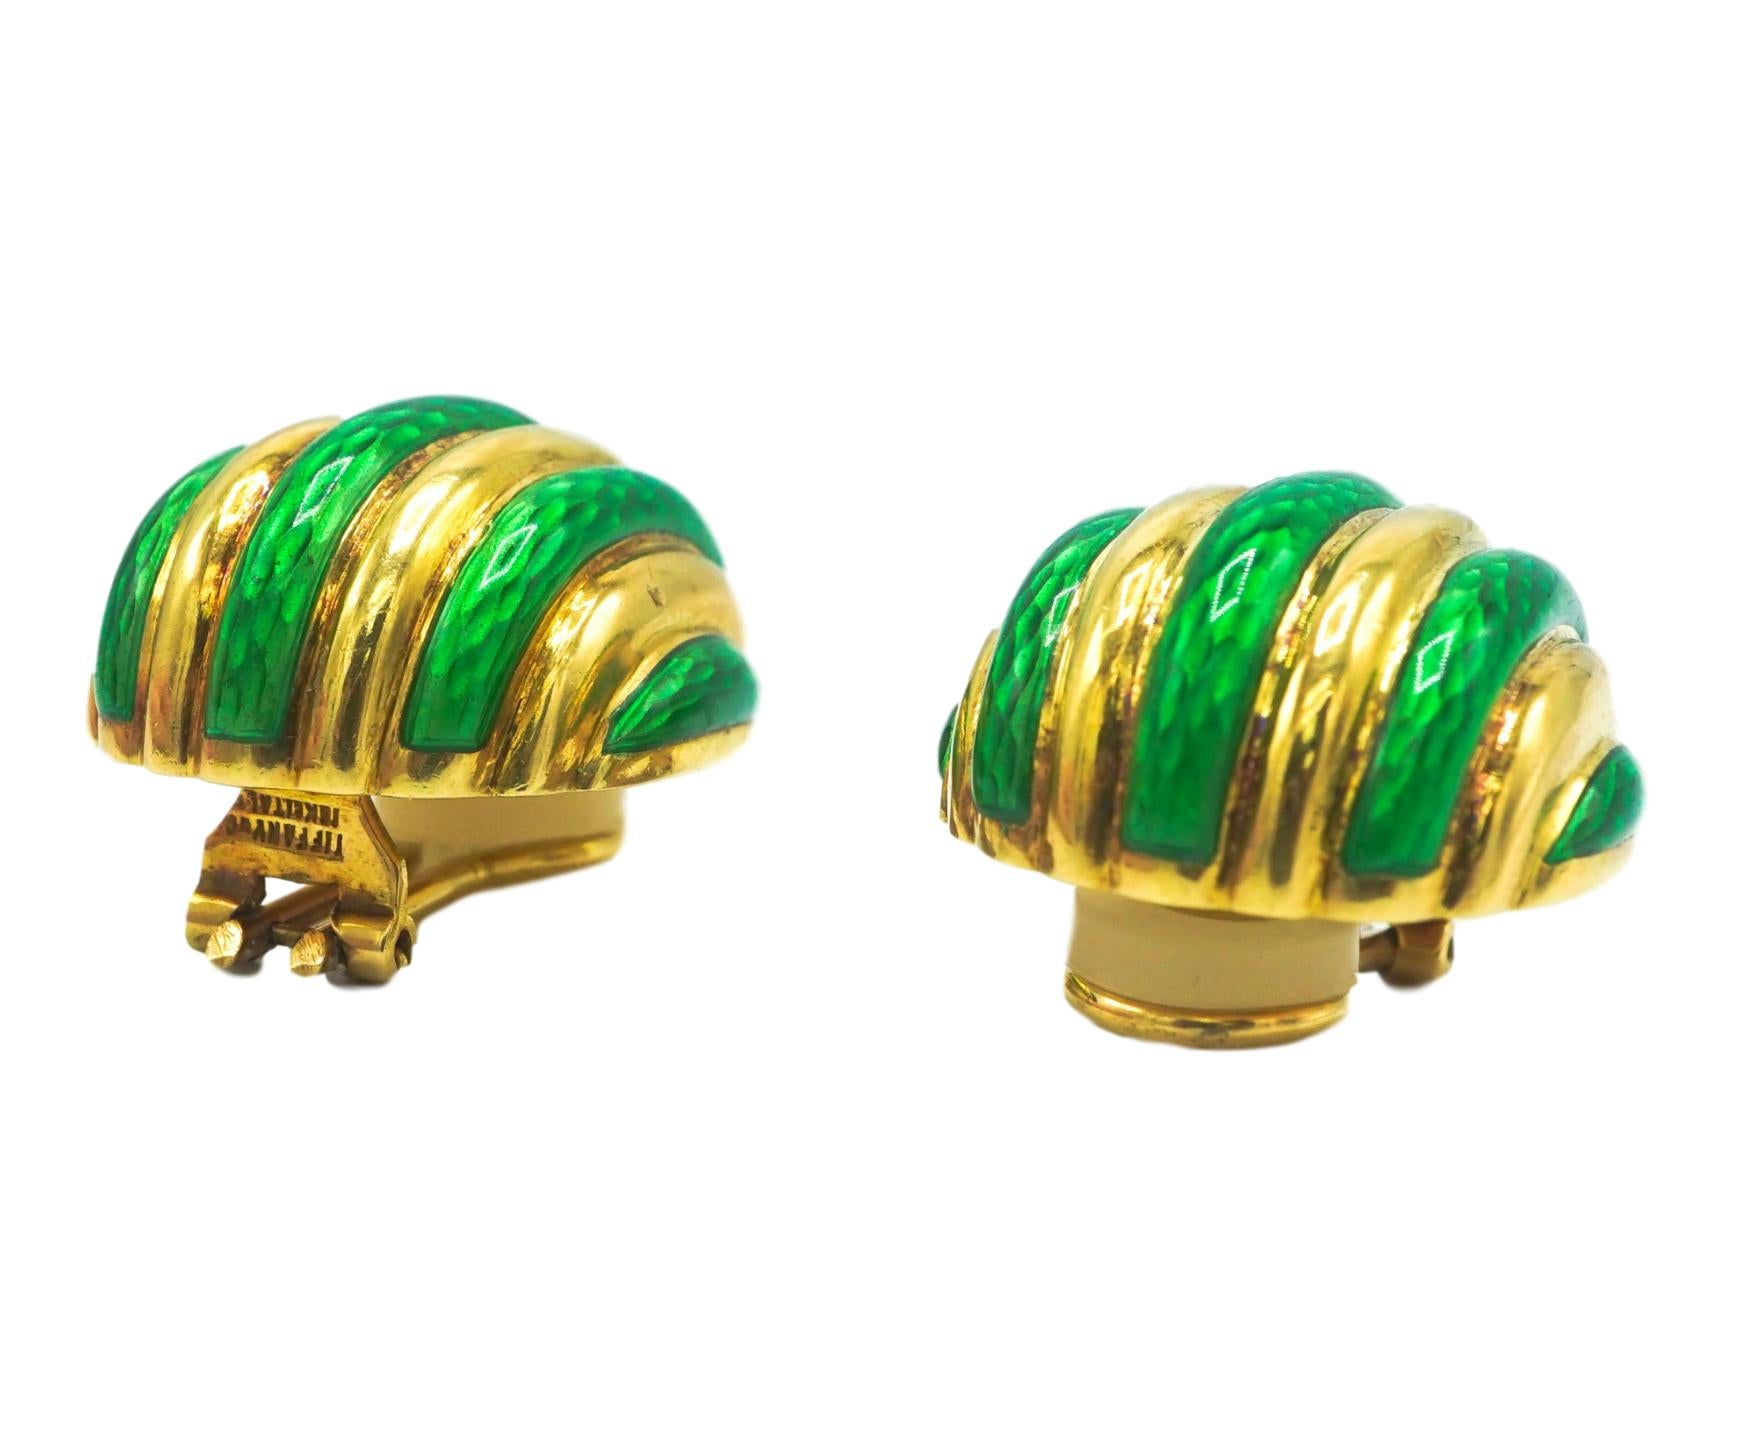 Tiffany & Co. Enamel and Gold Earrings of fluted bombe' form set with rows of green enamel.
Metal: 18K Yellow Gold
Signature: Tiffany& Co
Marks: 18K Italy 
Size/Dimensions: 2.4 x 2.1 cm

SKU#E-01974